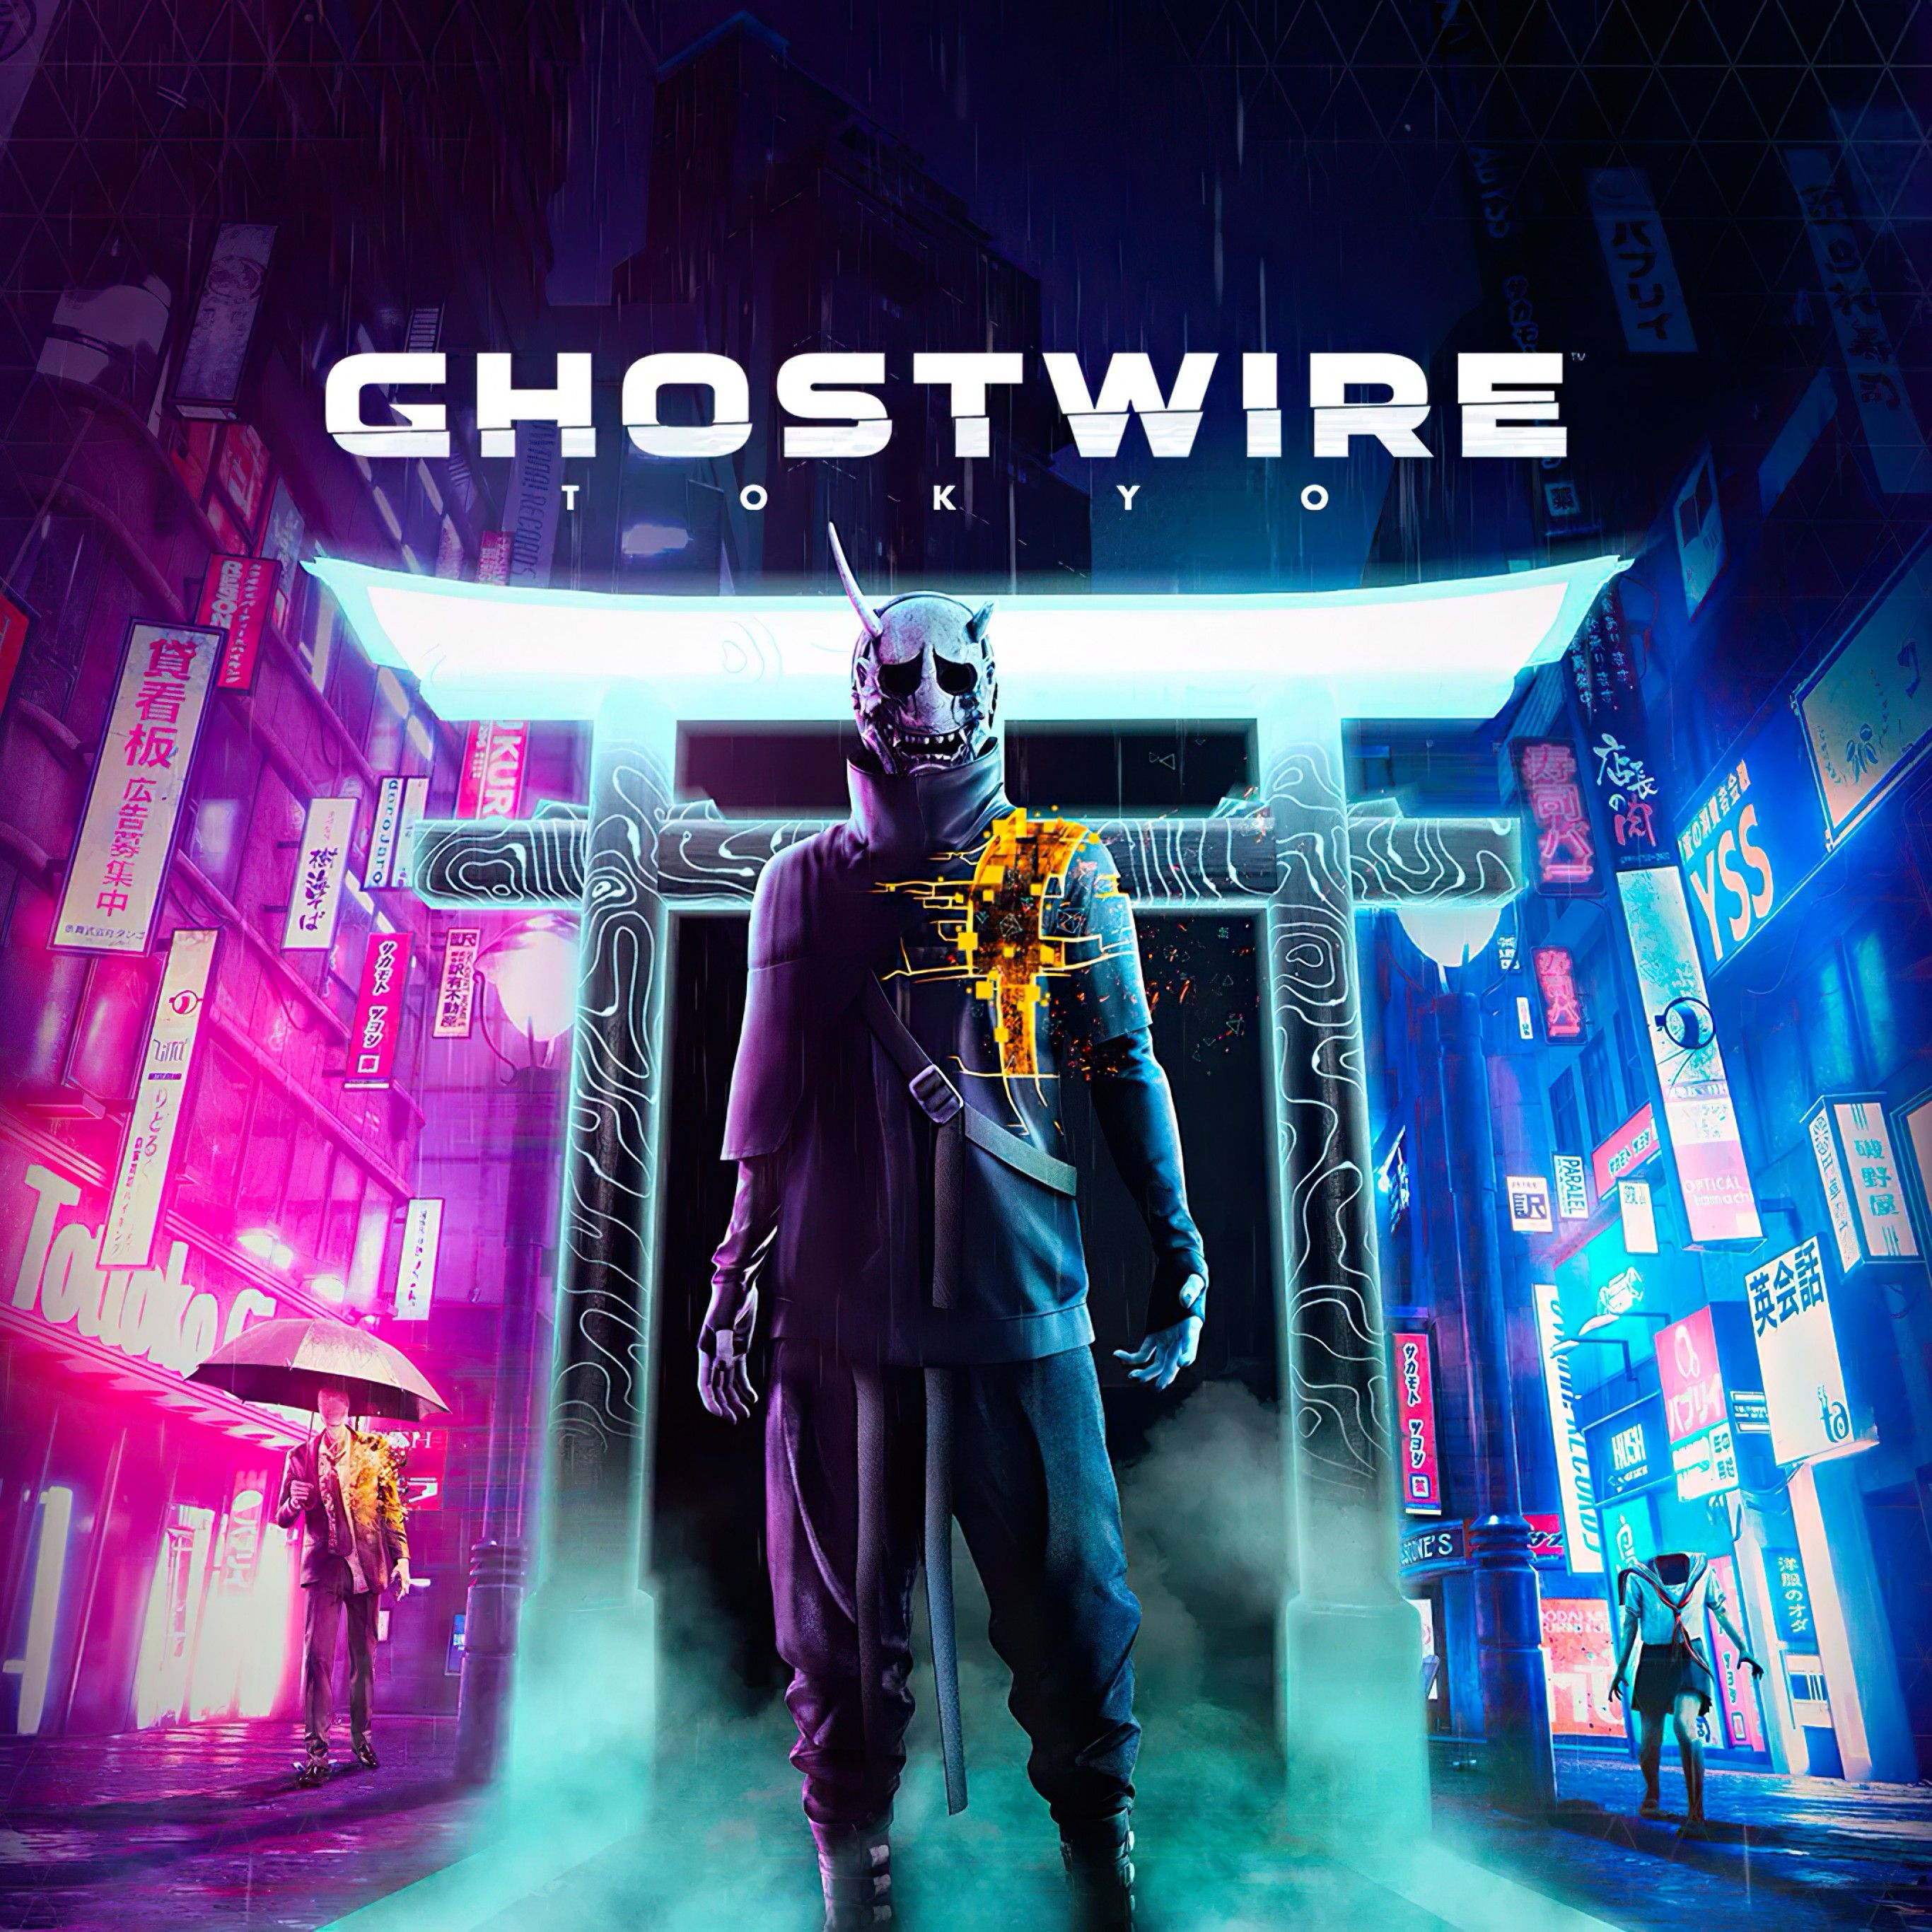 GhostWire: Tokyo 4K Wallpaper, PlayStation PC Games, 2021 Games, Games